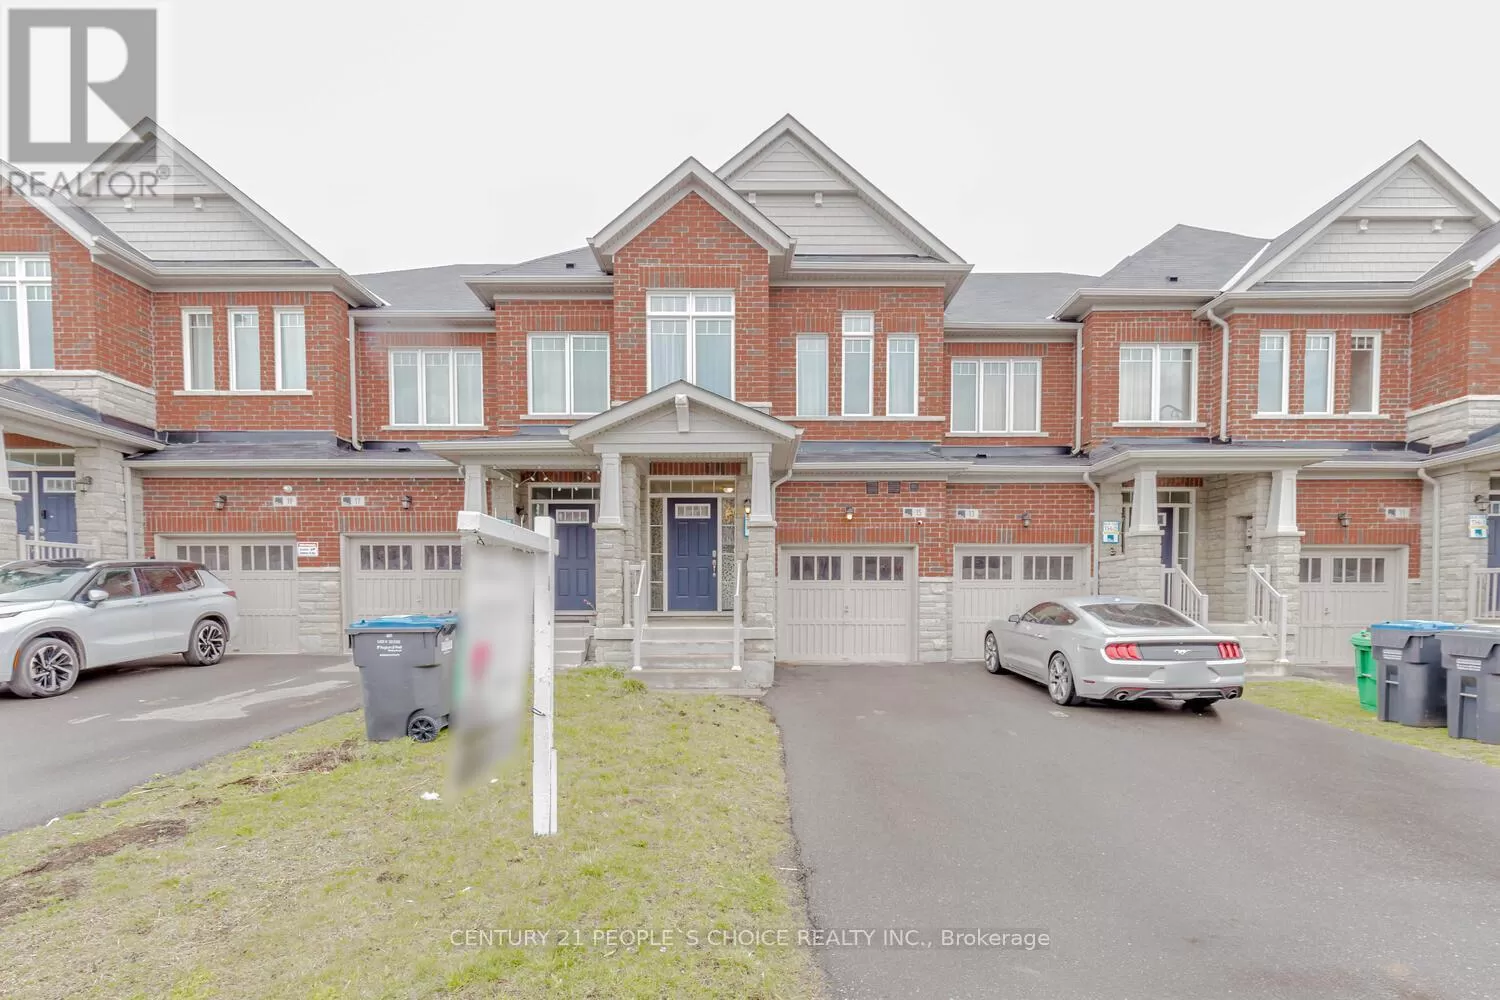 Row / Townhouse for rent: 15 Phyllis Drive, Caledon, Ontario L7C 2E9